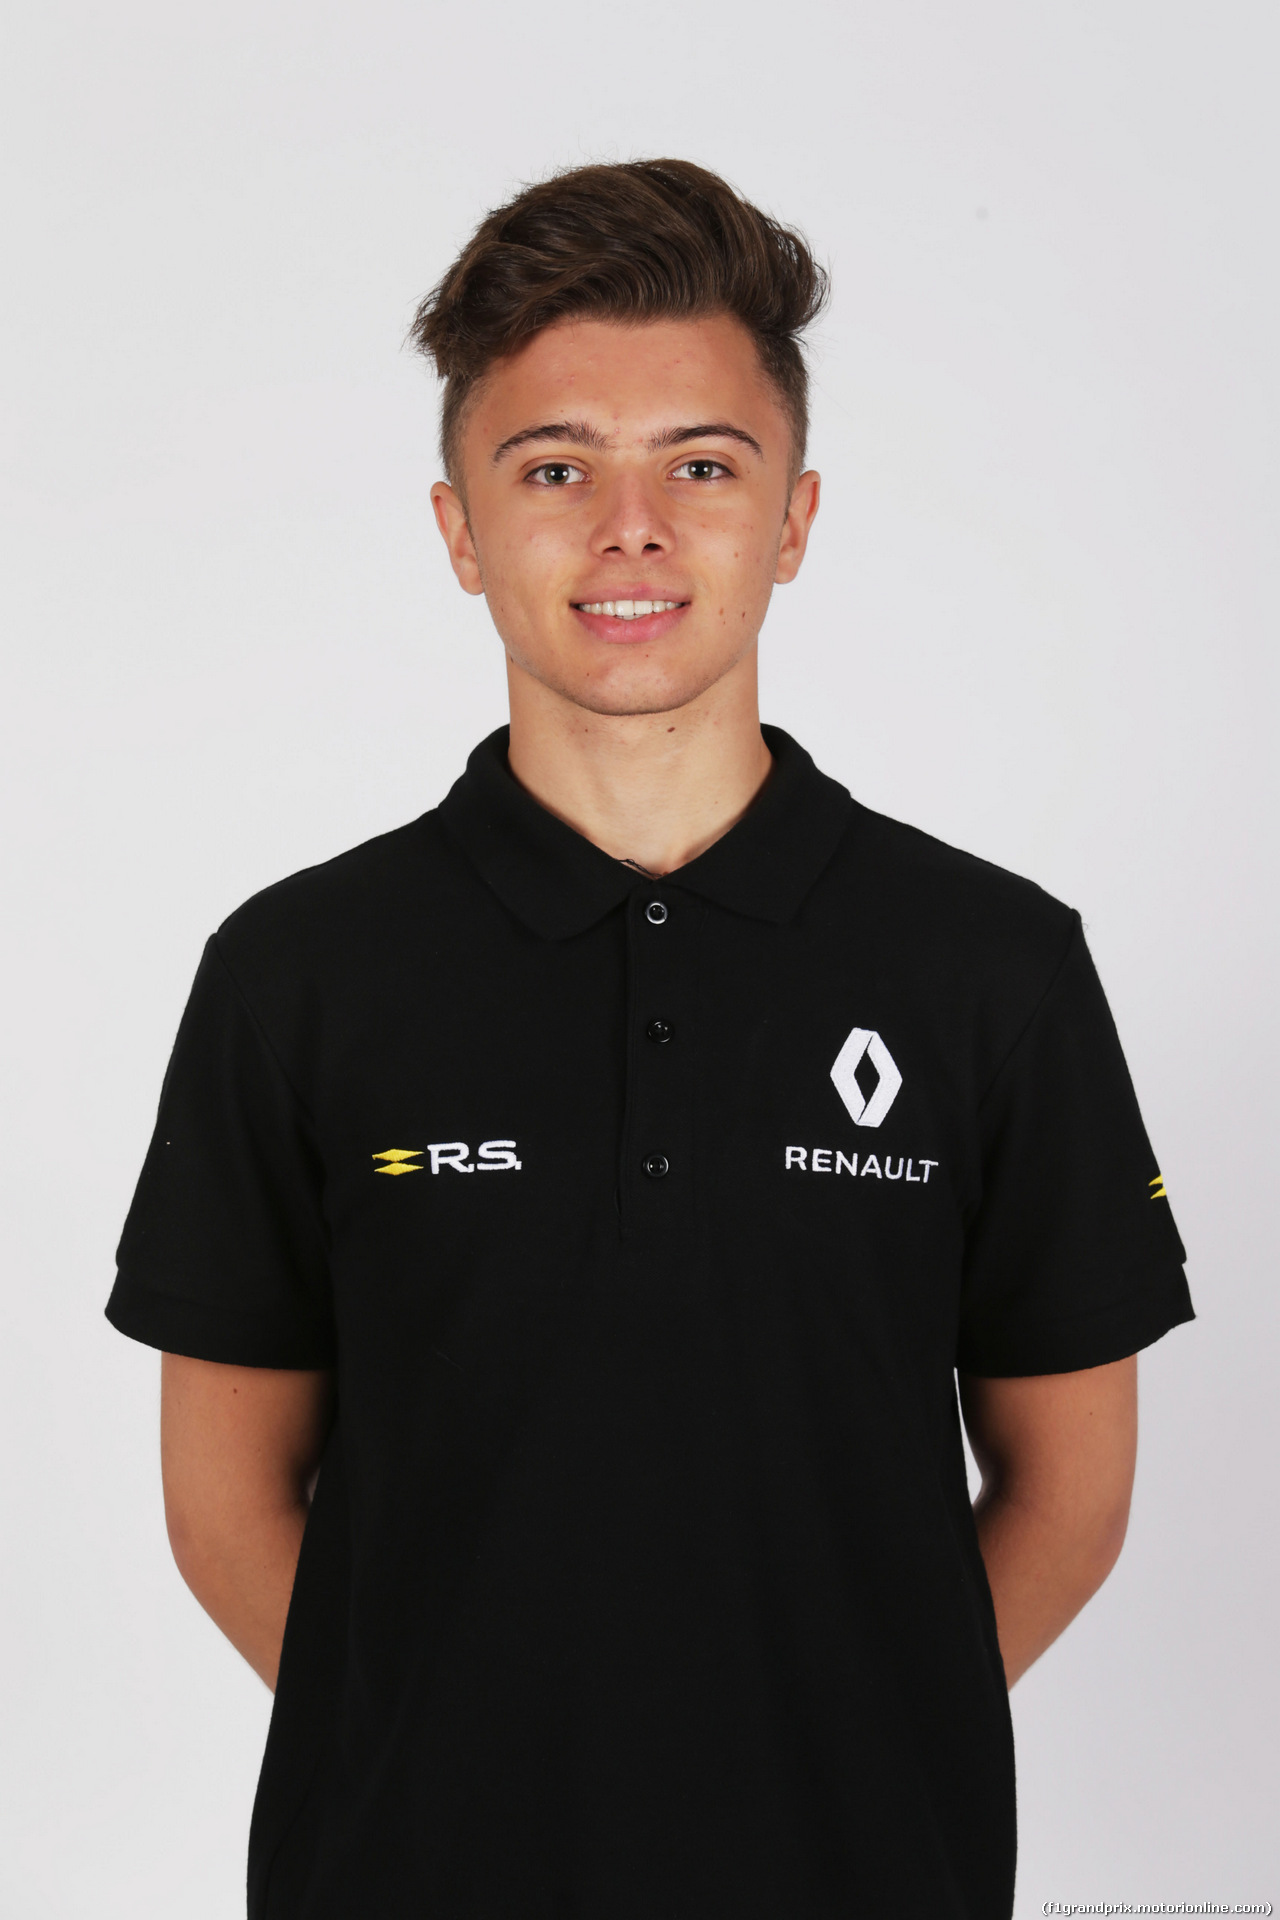 RENAULT RS17, Max Fewtrell (GBR) Renault Sport Academy Driver.
21.02.2017.